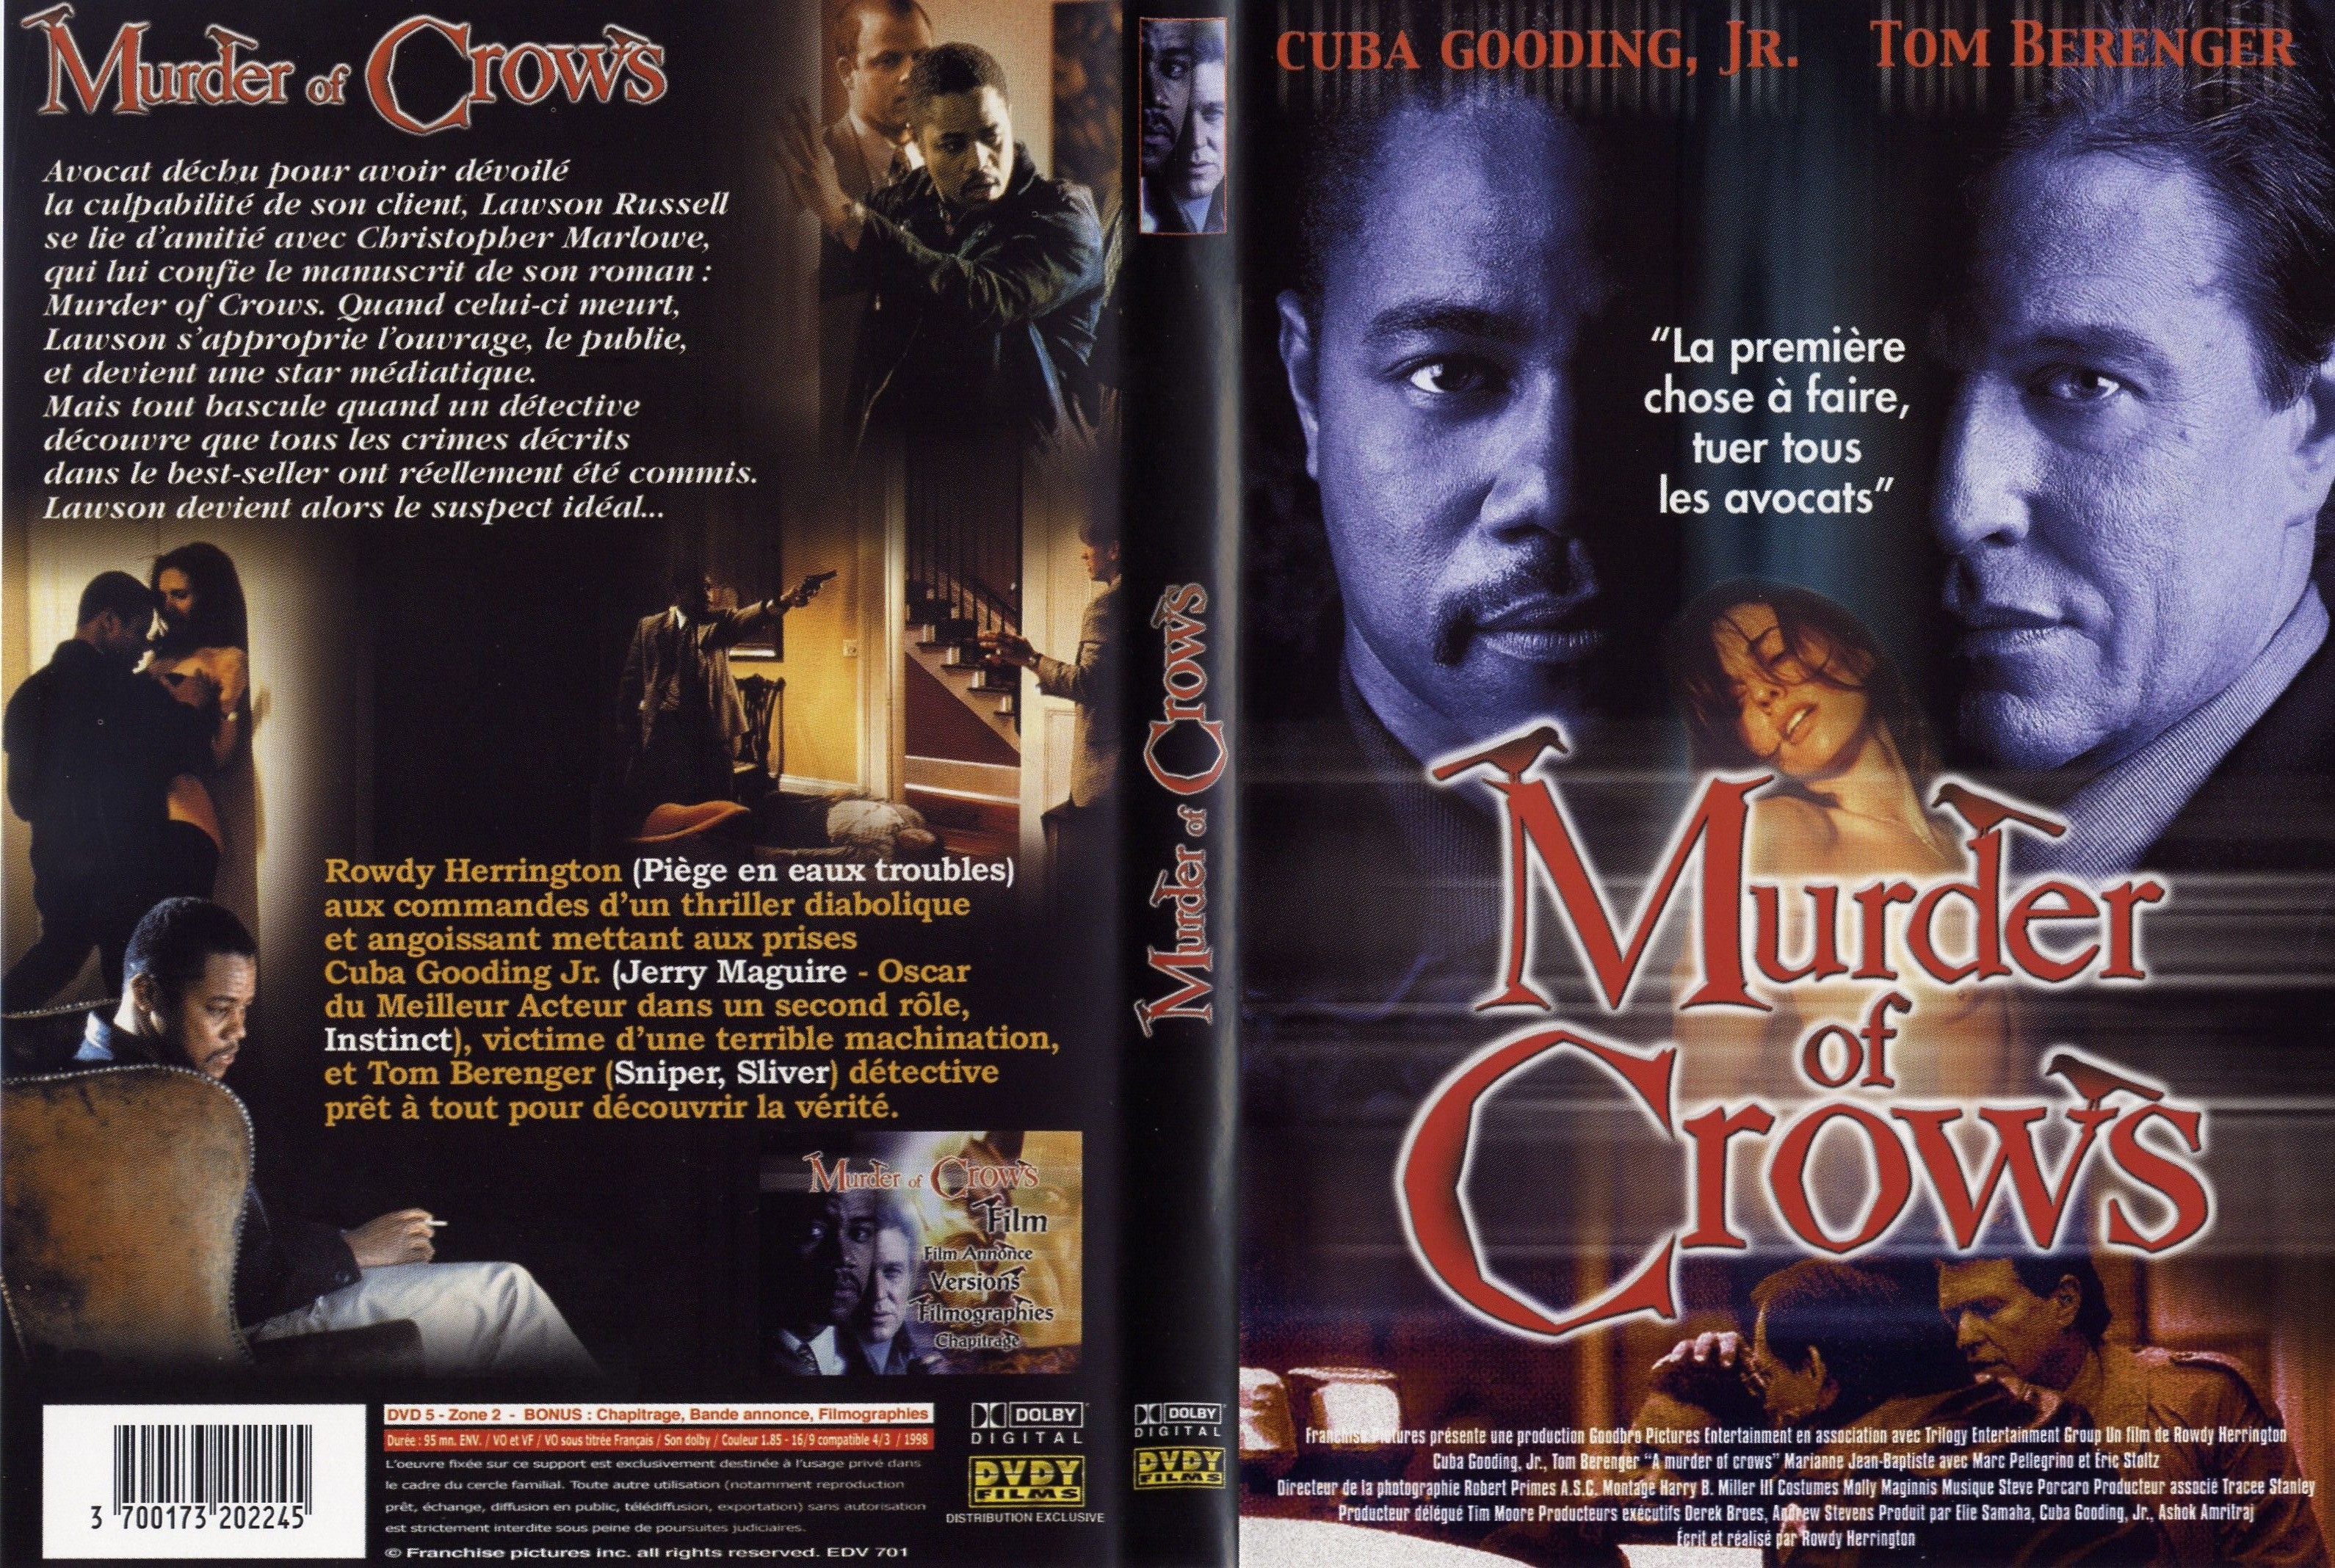 Jaquette DVD Murder of crows